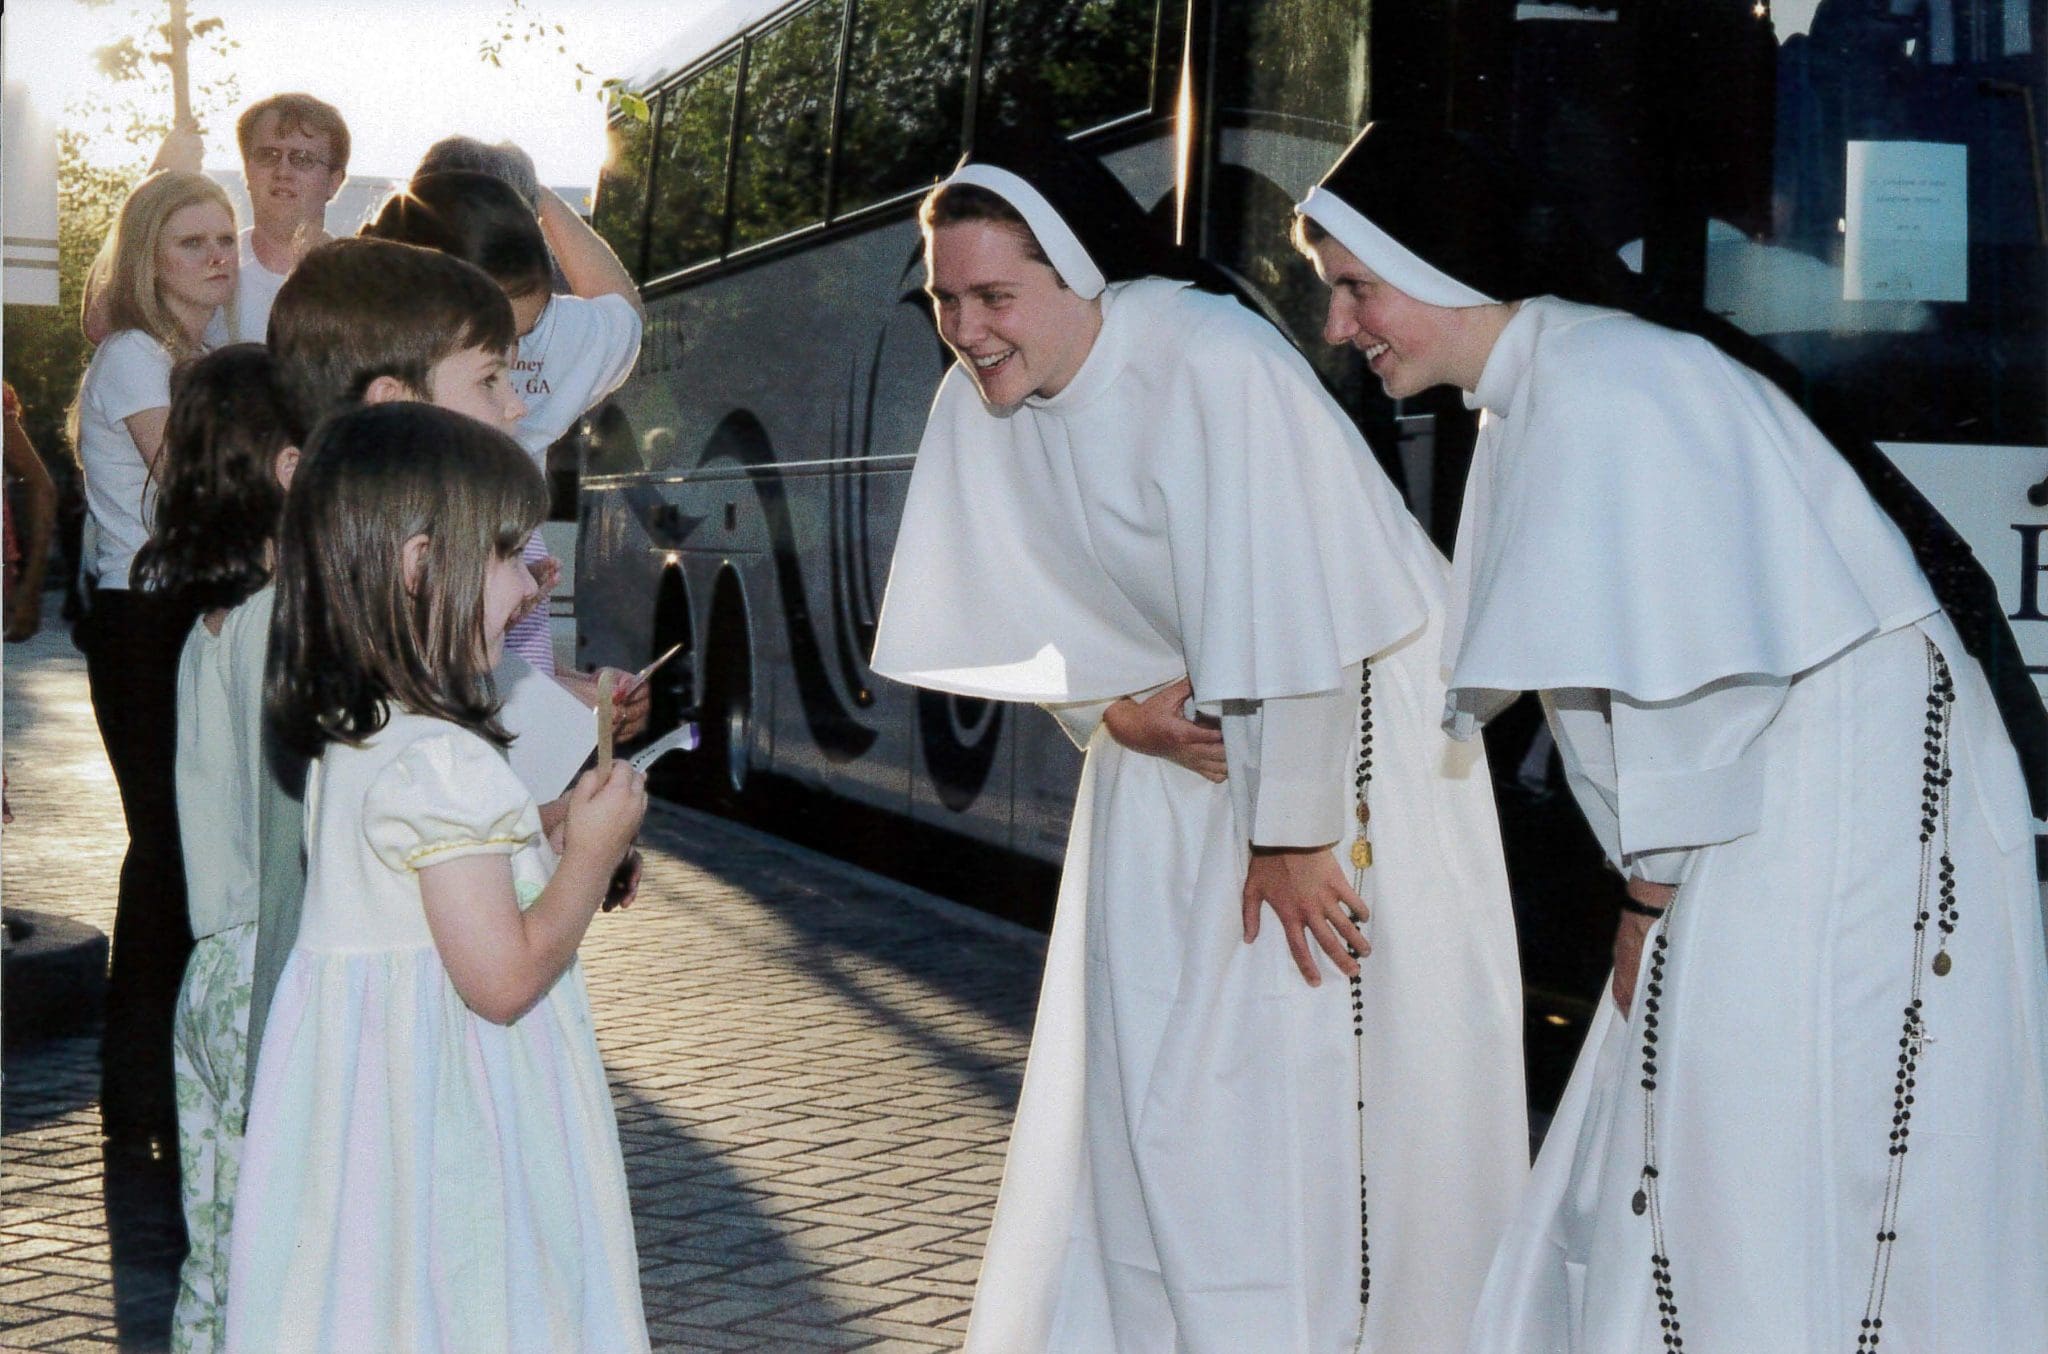 Sister Cecilia Joseph, OP, left, and Sister Anastasia, OP, converse with a litter girl at the Eucharistic Congress at the Georgia International Congress Center. [See Georgia Bulletin: April 29, 2004]